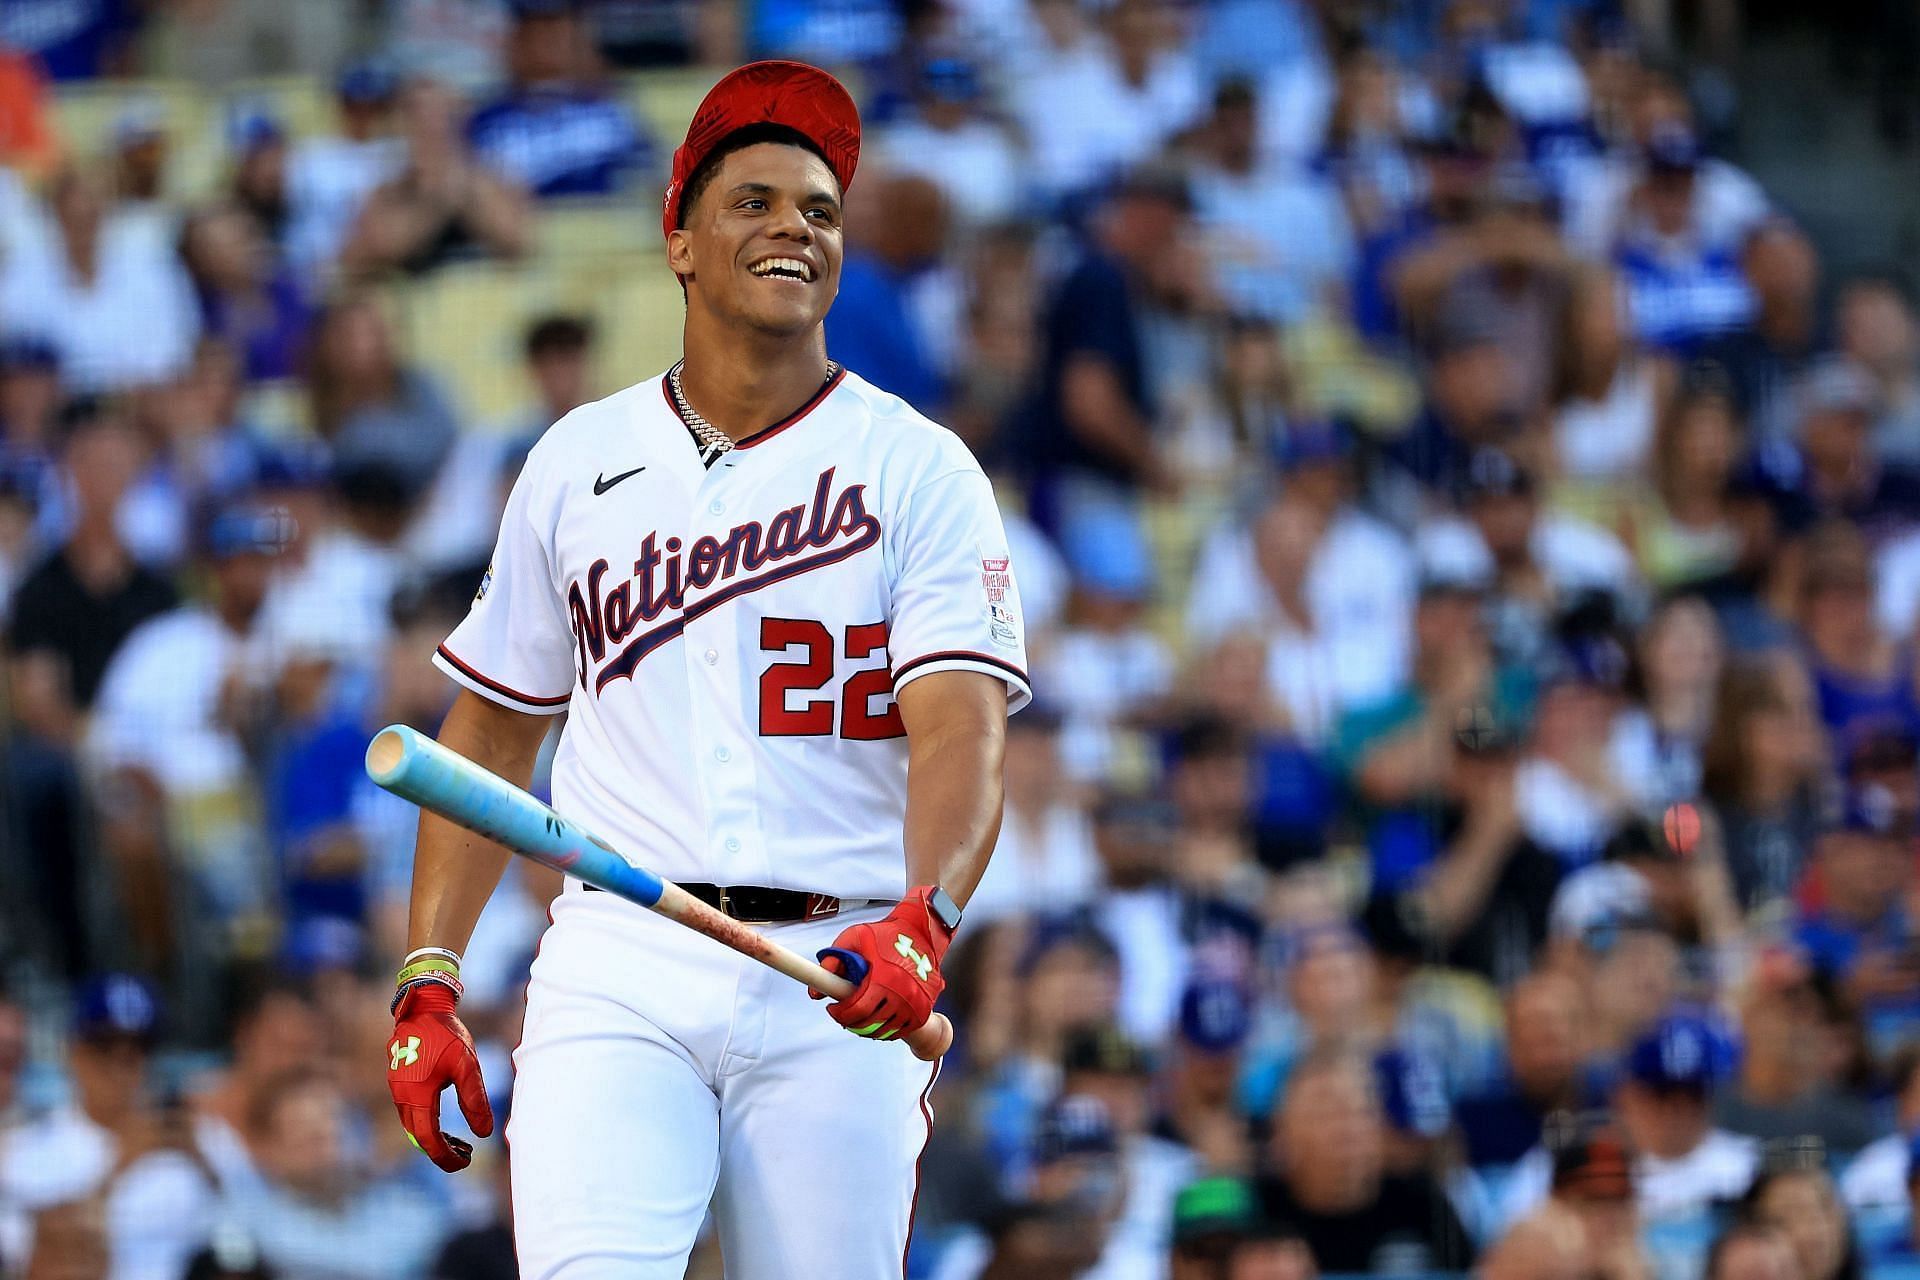 National League All-Star Juan Soto #22 of the Washington Nationals reacts while competing during the 2022 T-Mobile Home Run Derby at Dodger Stadium on July 18, 2022 in Los Angeles, California. (Photo by Sean M. Haffey/Getty Images)